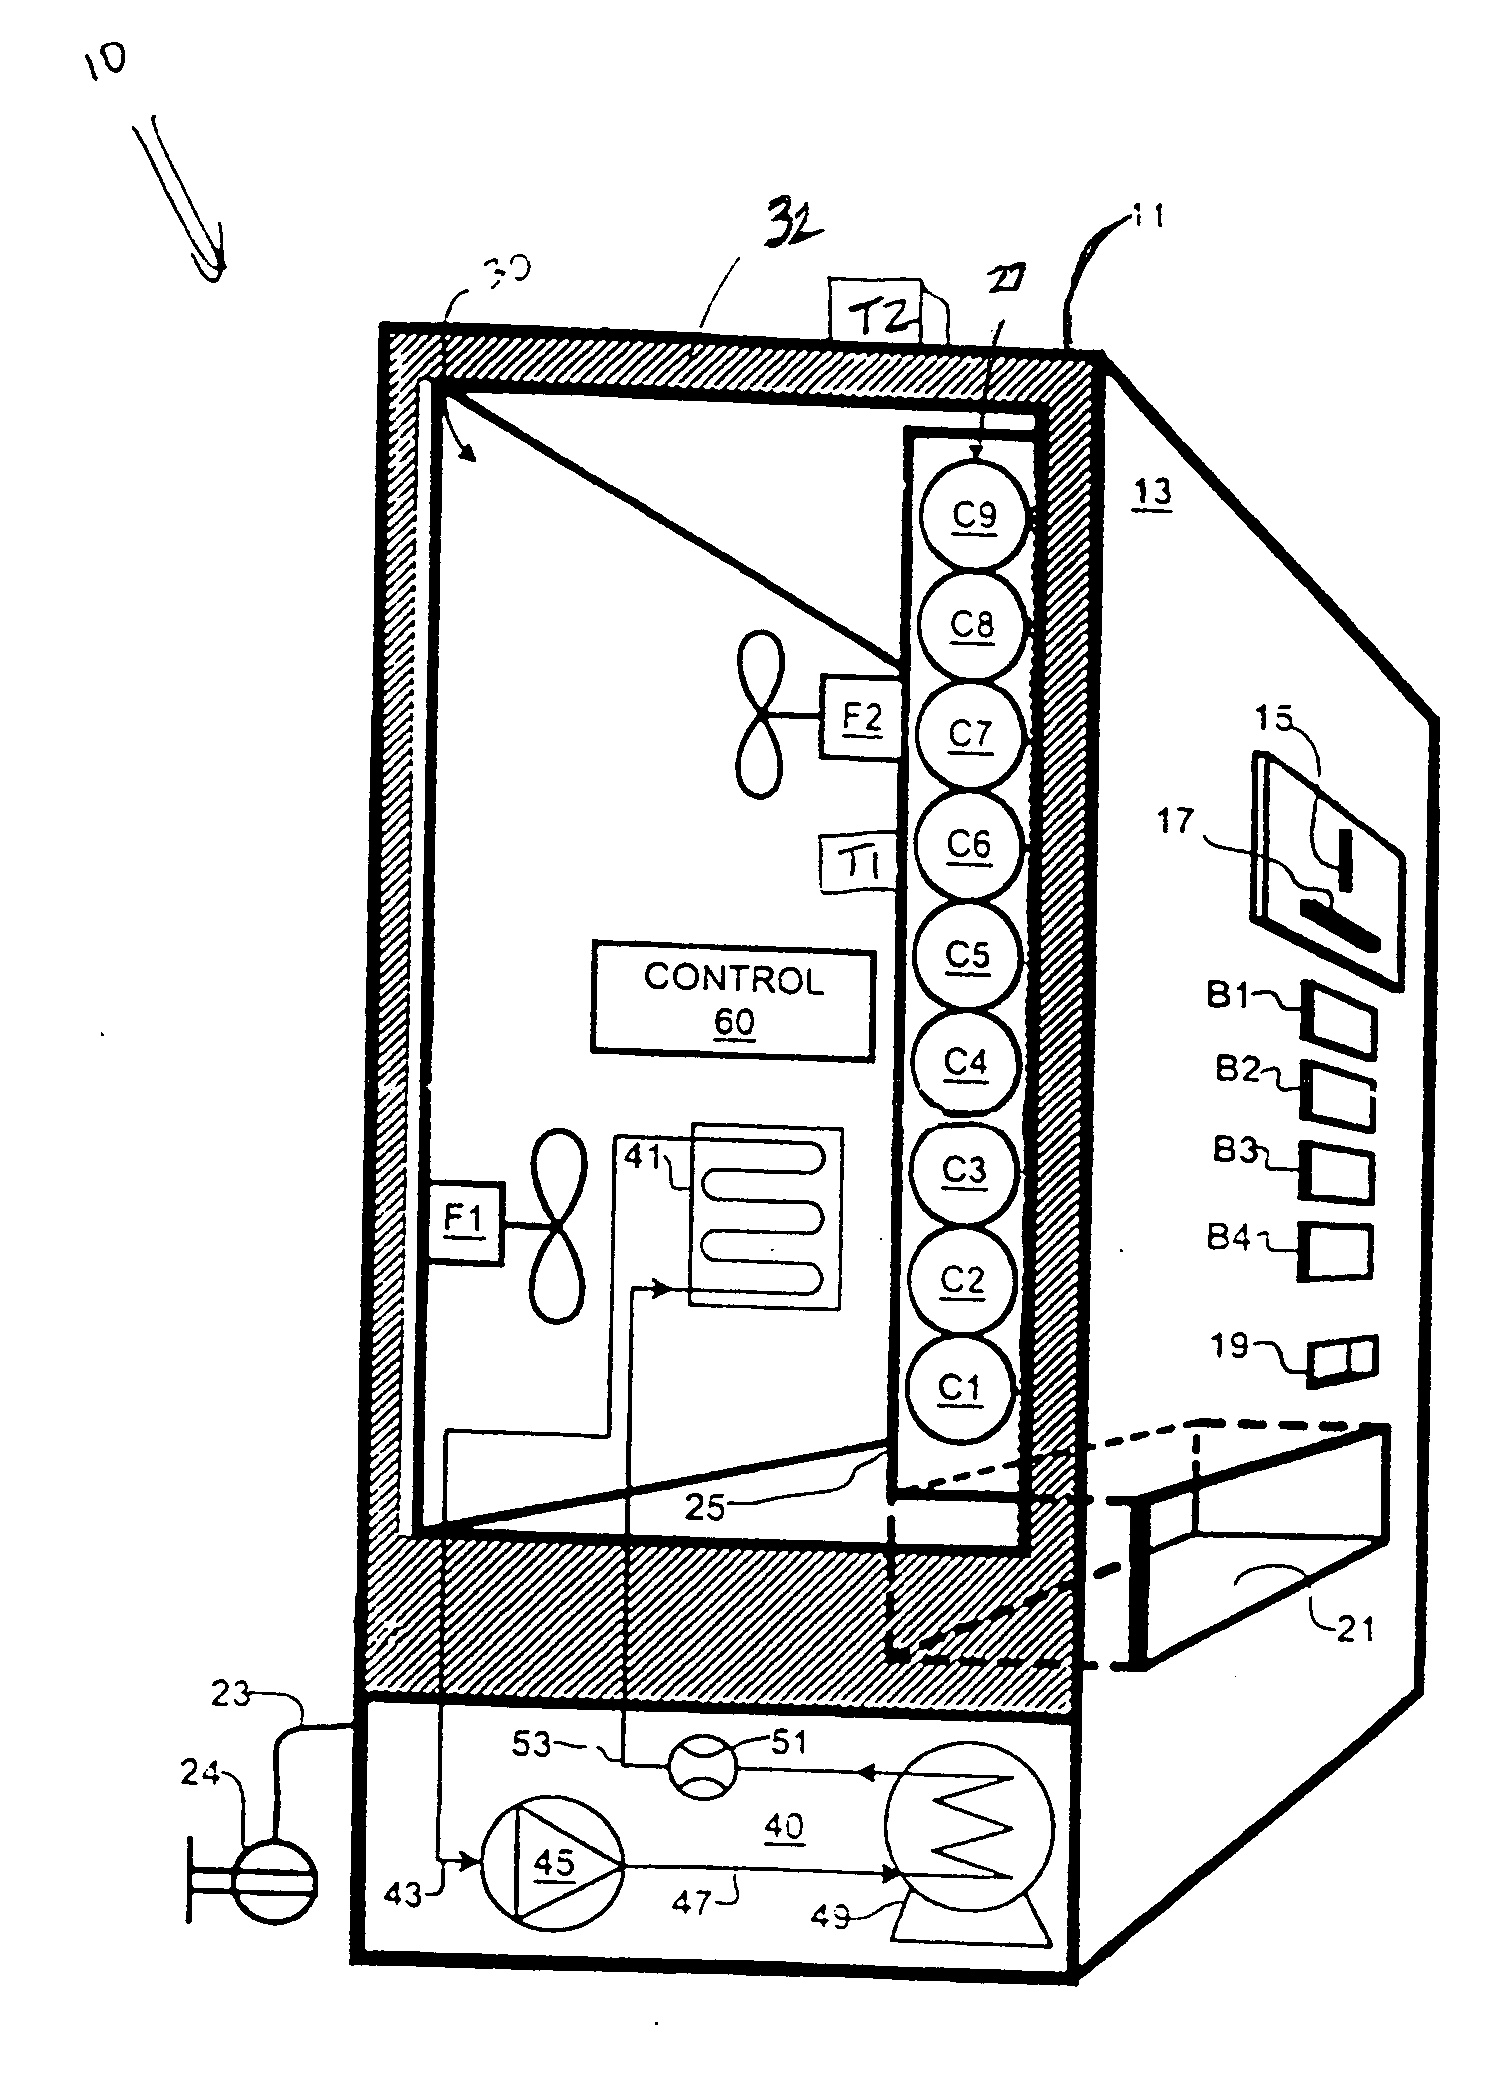 Method and apparatus for conserving power consumed by a refrigerated appliance utilizing audio signal detection